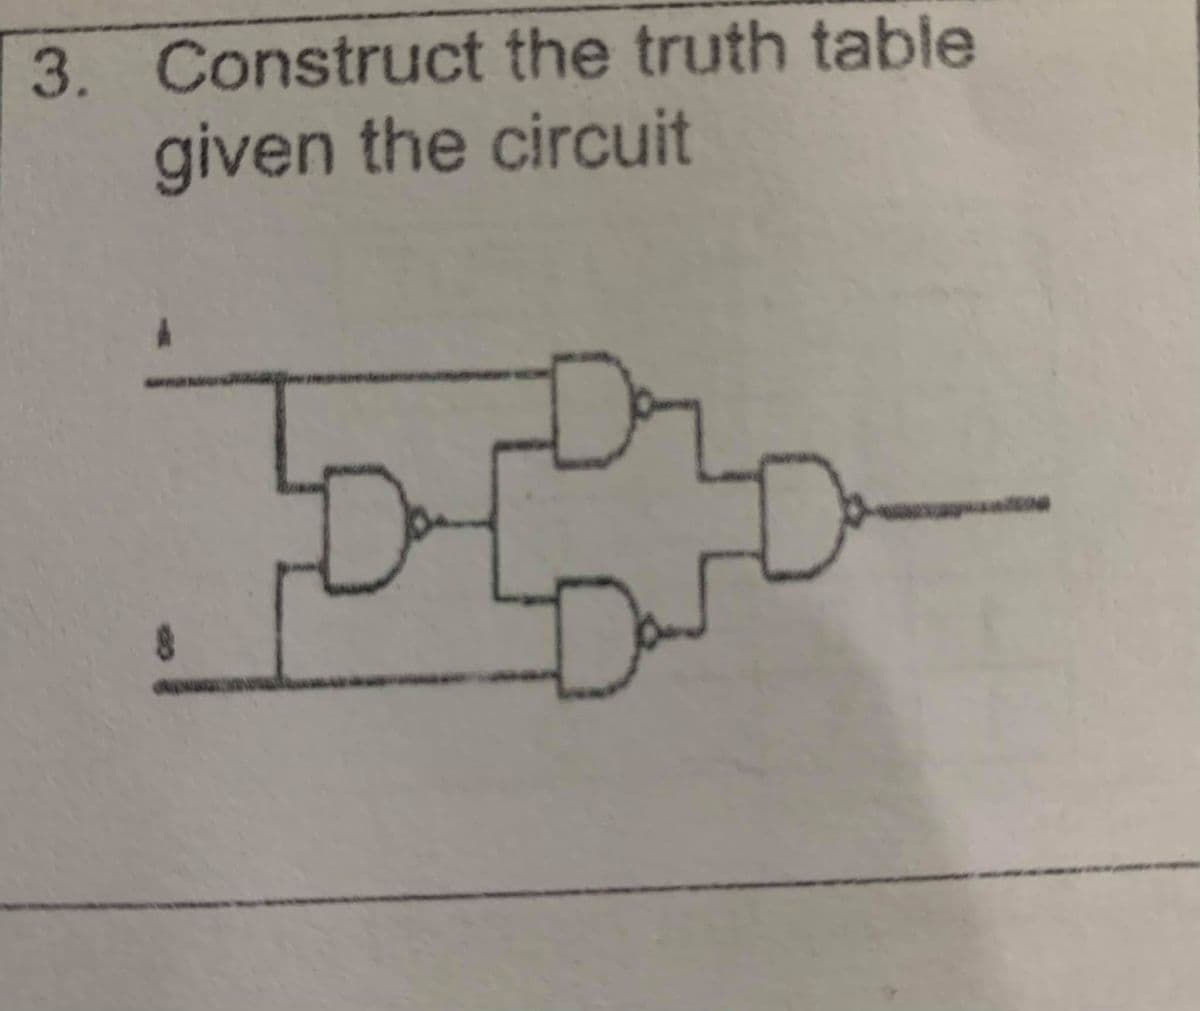 3. Construct the truth table
given the circuit
